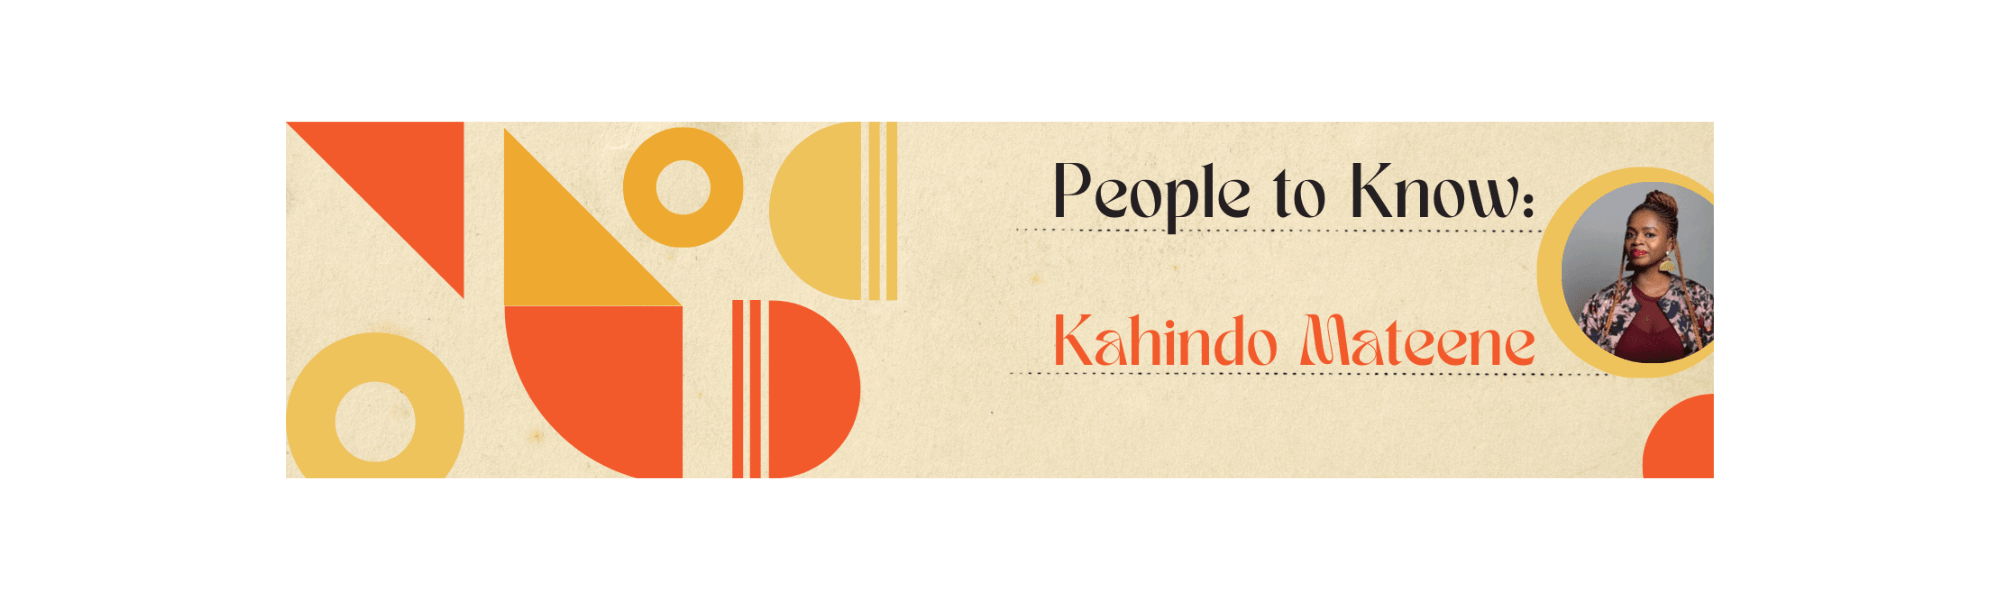 people to know banner